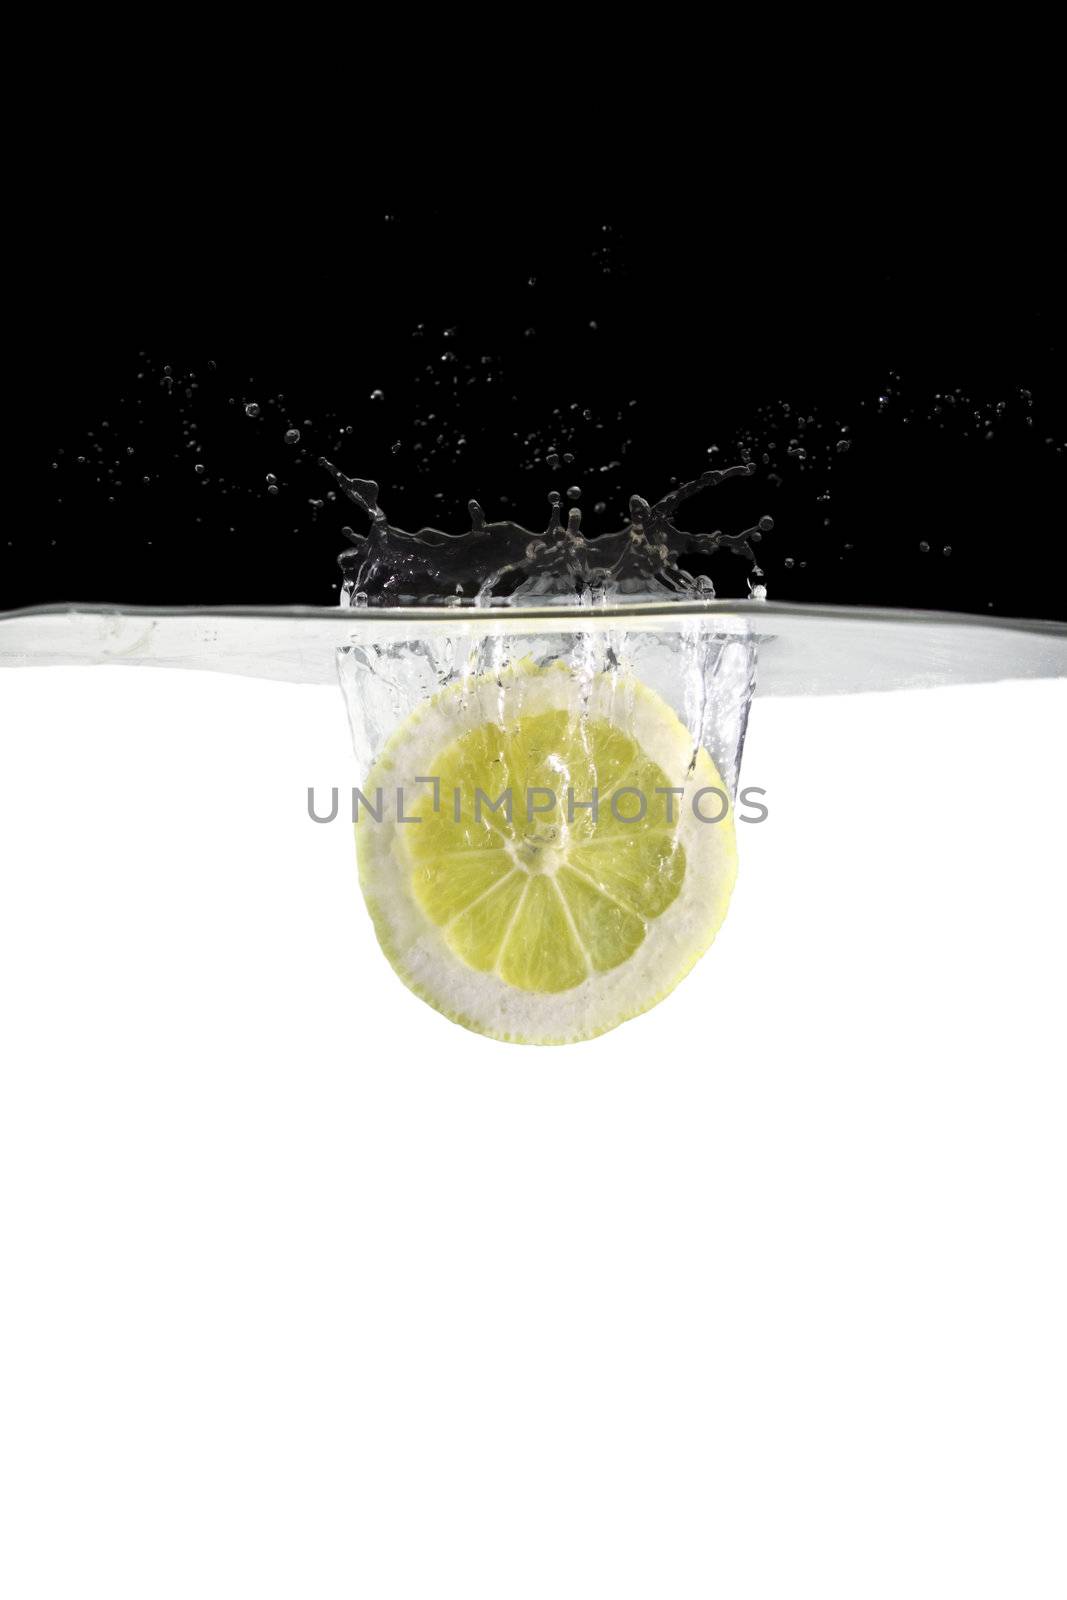 one slice of lemon thrown in water with black and white background